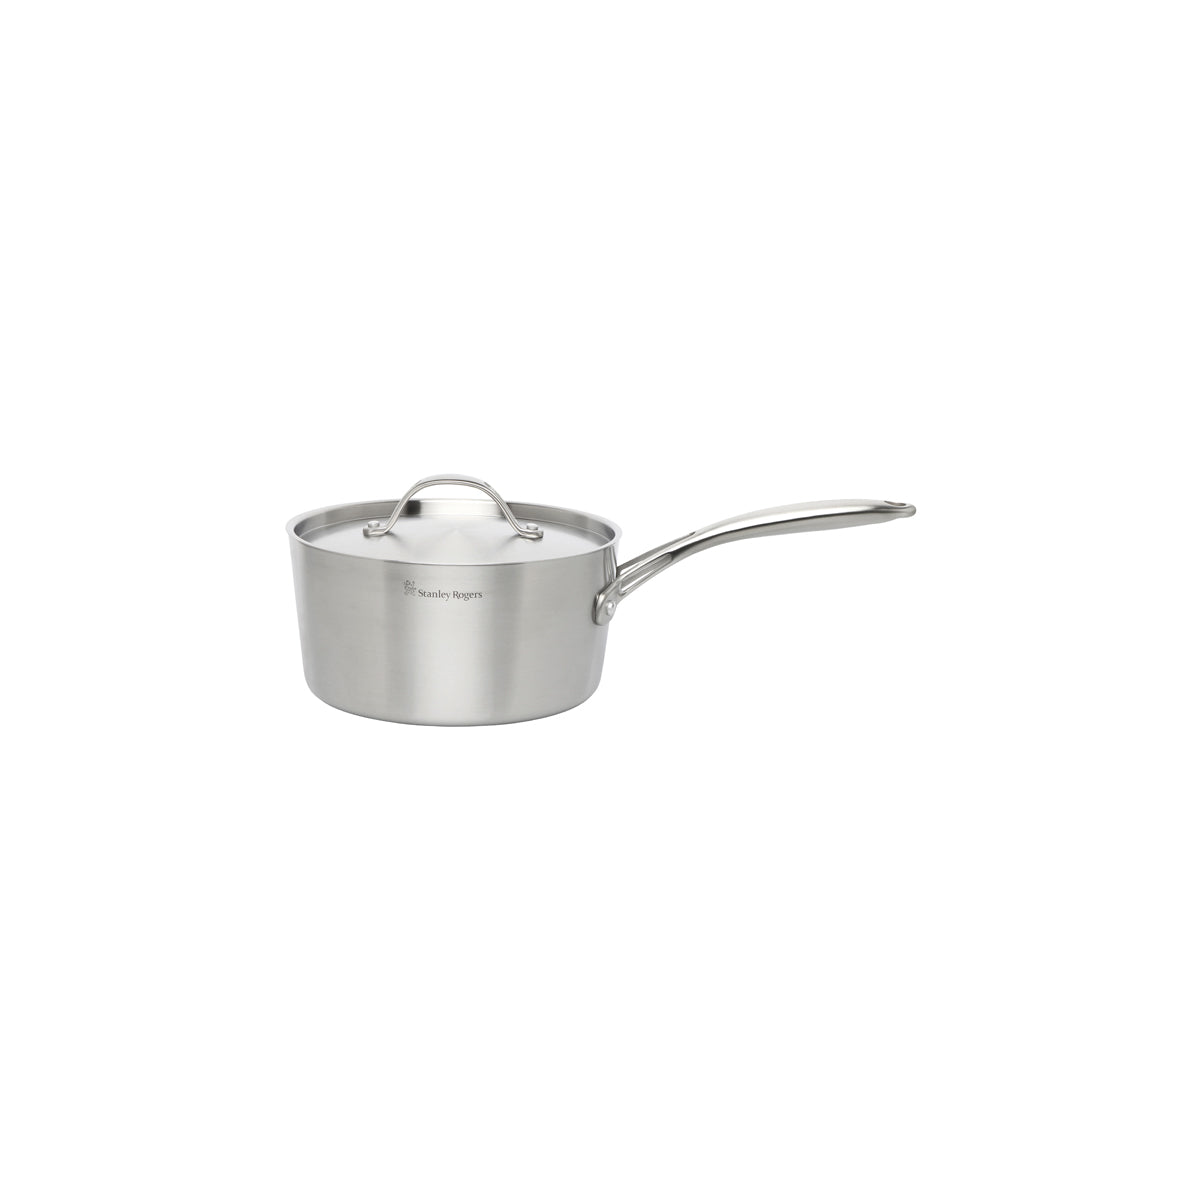 SR42285 Stanley Rogers Conical Tri Ply Saucepan 200mm Tomkin Australia Hospitality Supplies